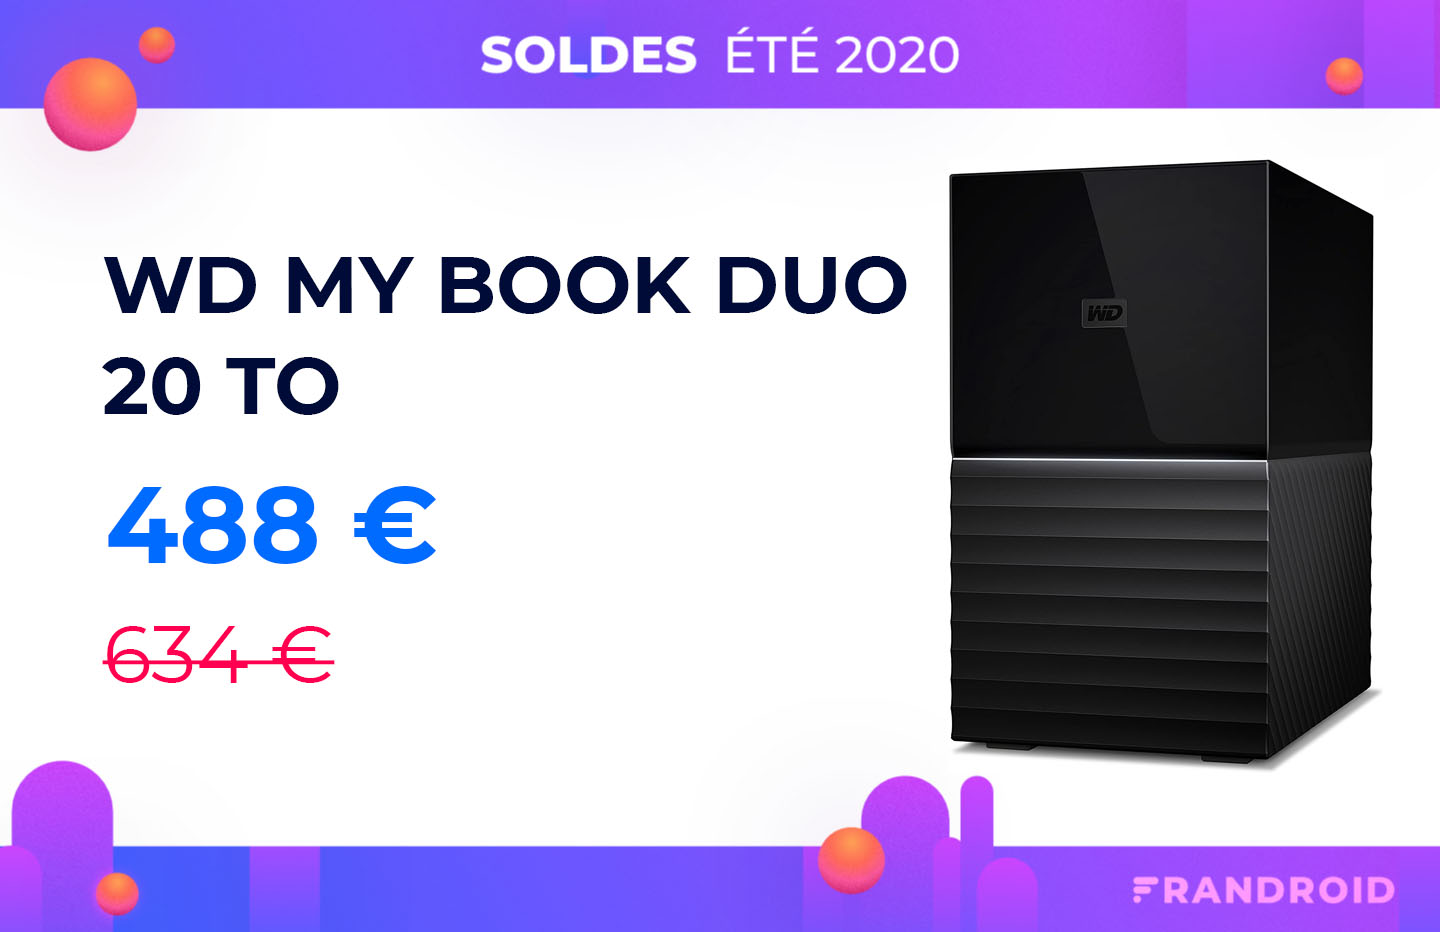 https://images.frandroid.com/wp-content/uploads/2020/07/wd-my-book-duo-20-soldes.jpg